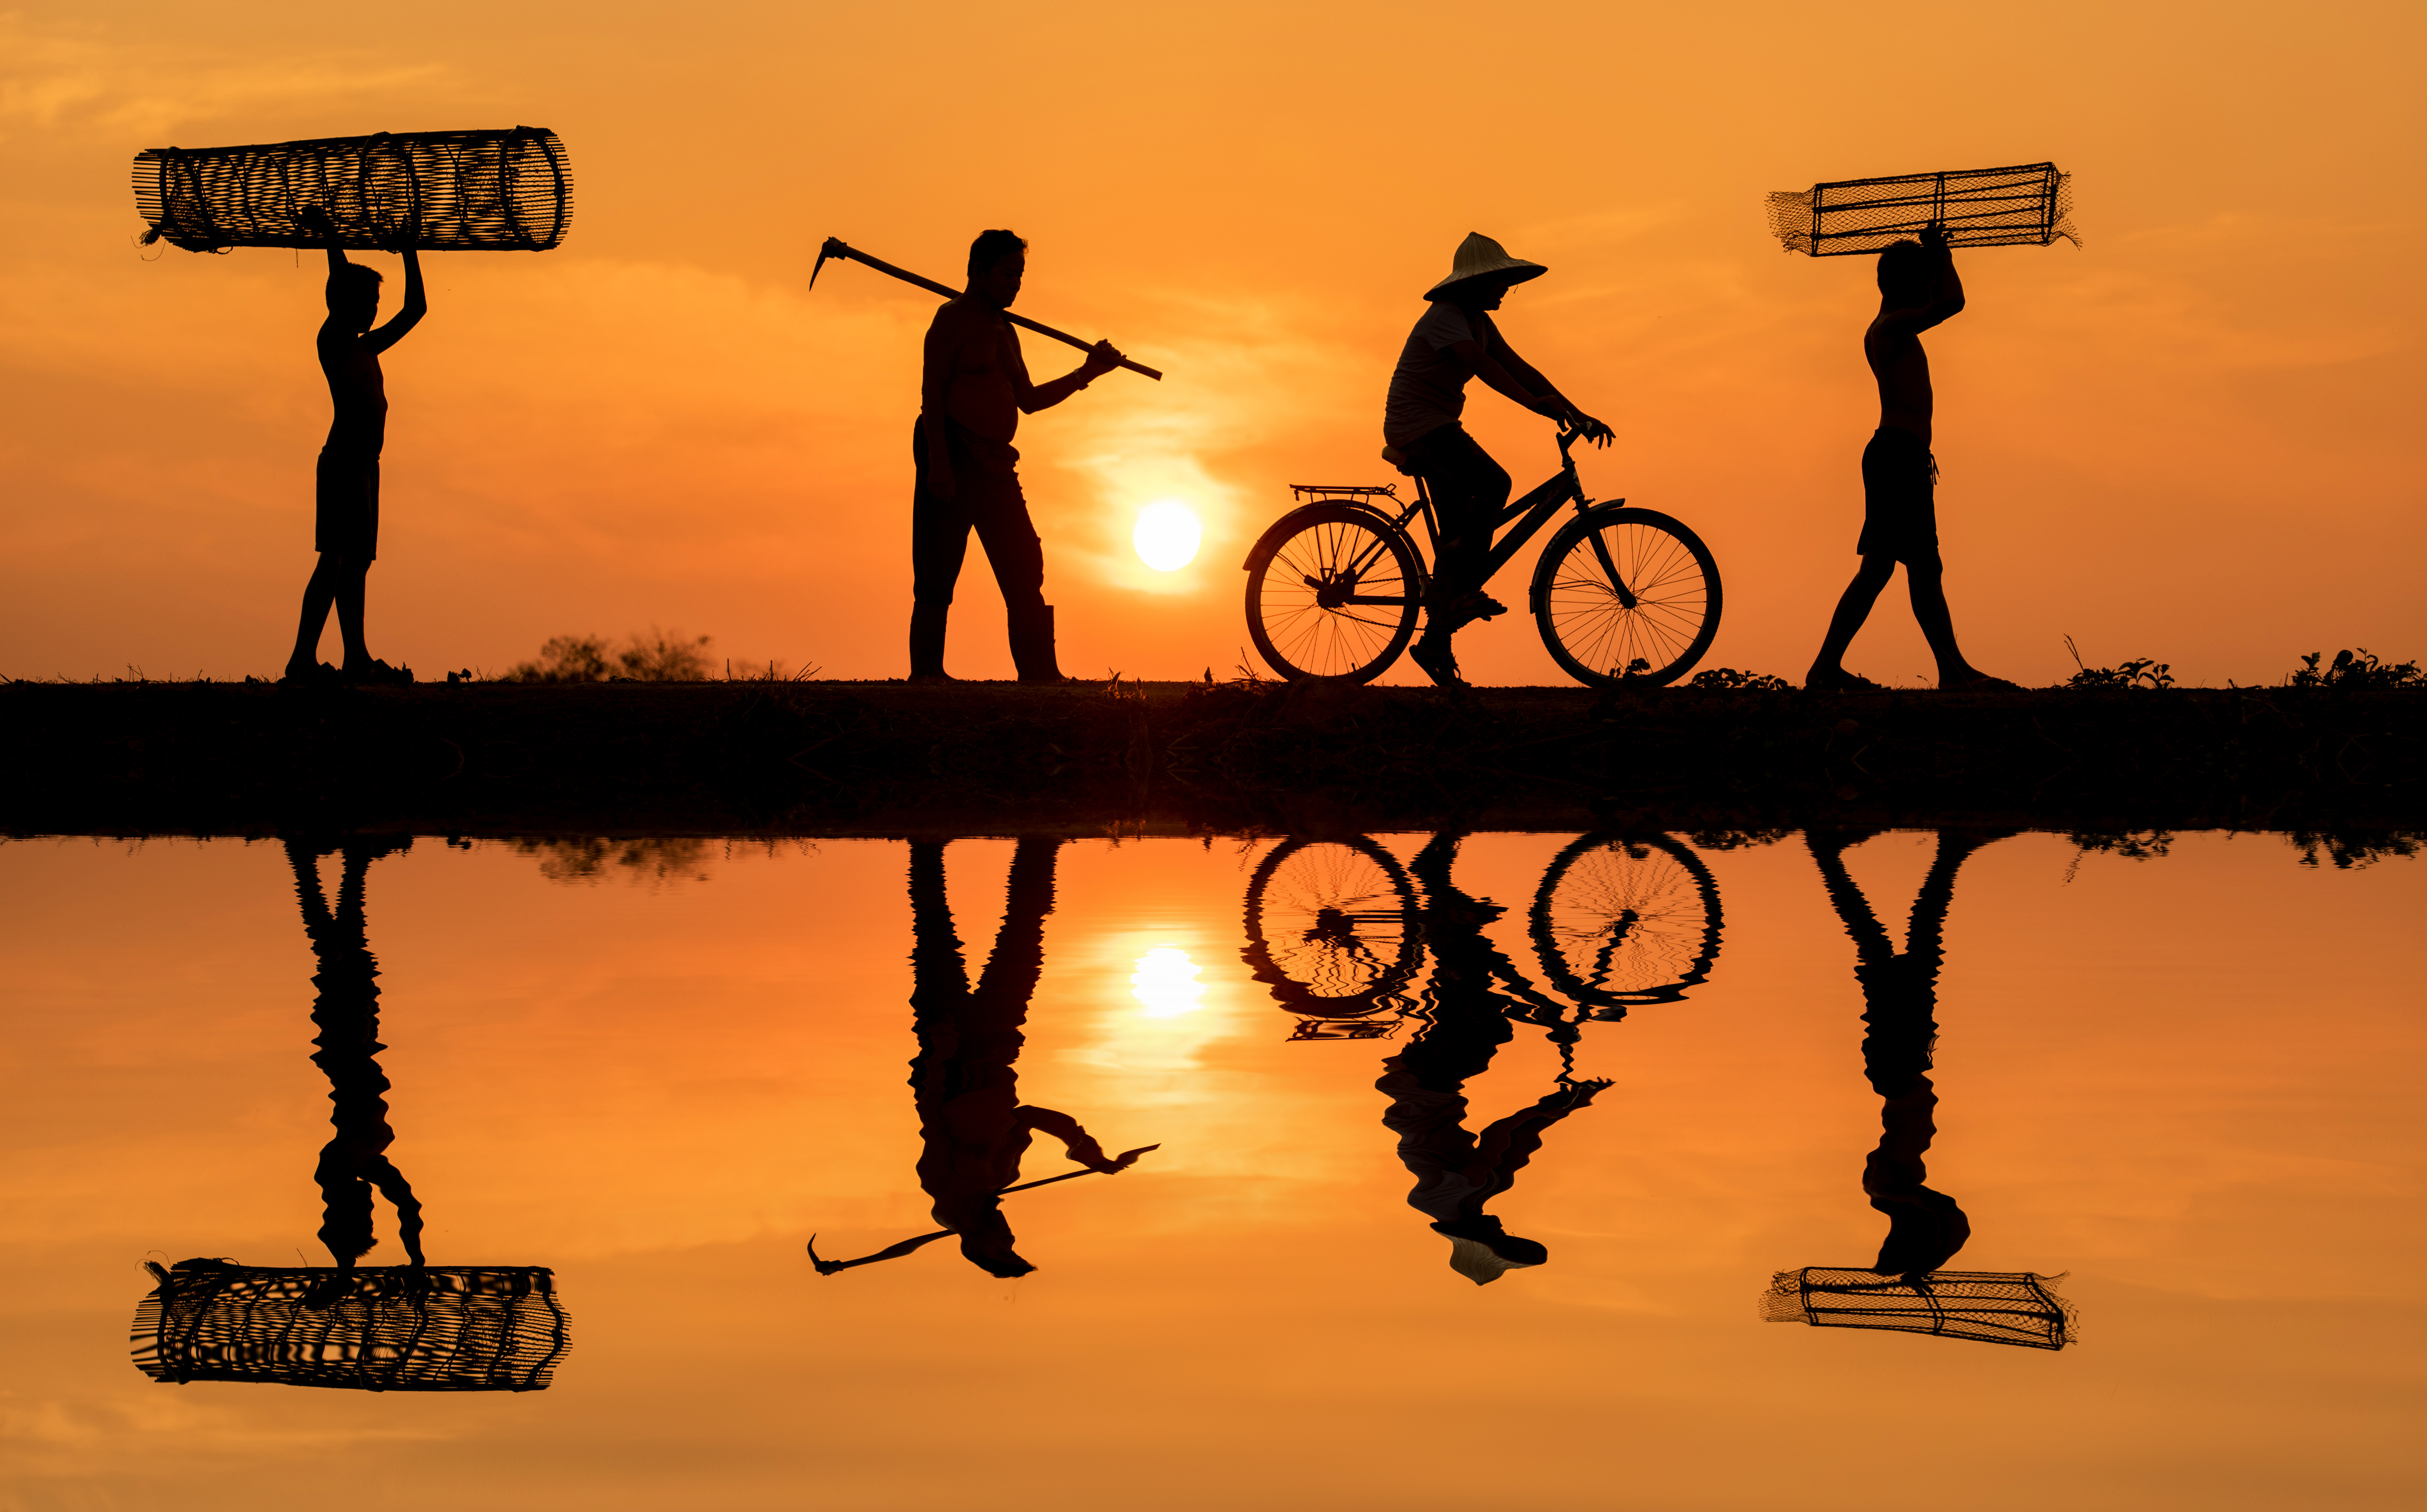 Four men on their way to work at sunrise. One is on a bicycle.